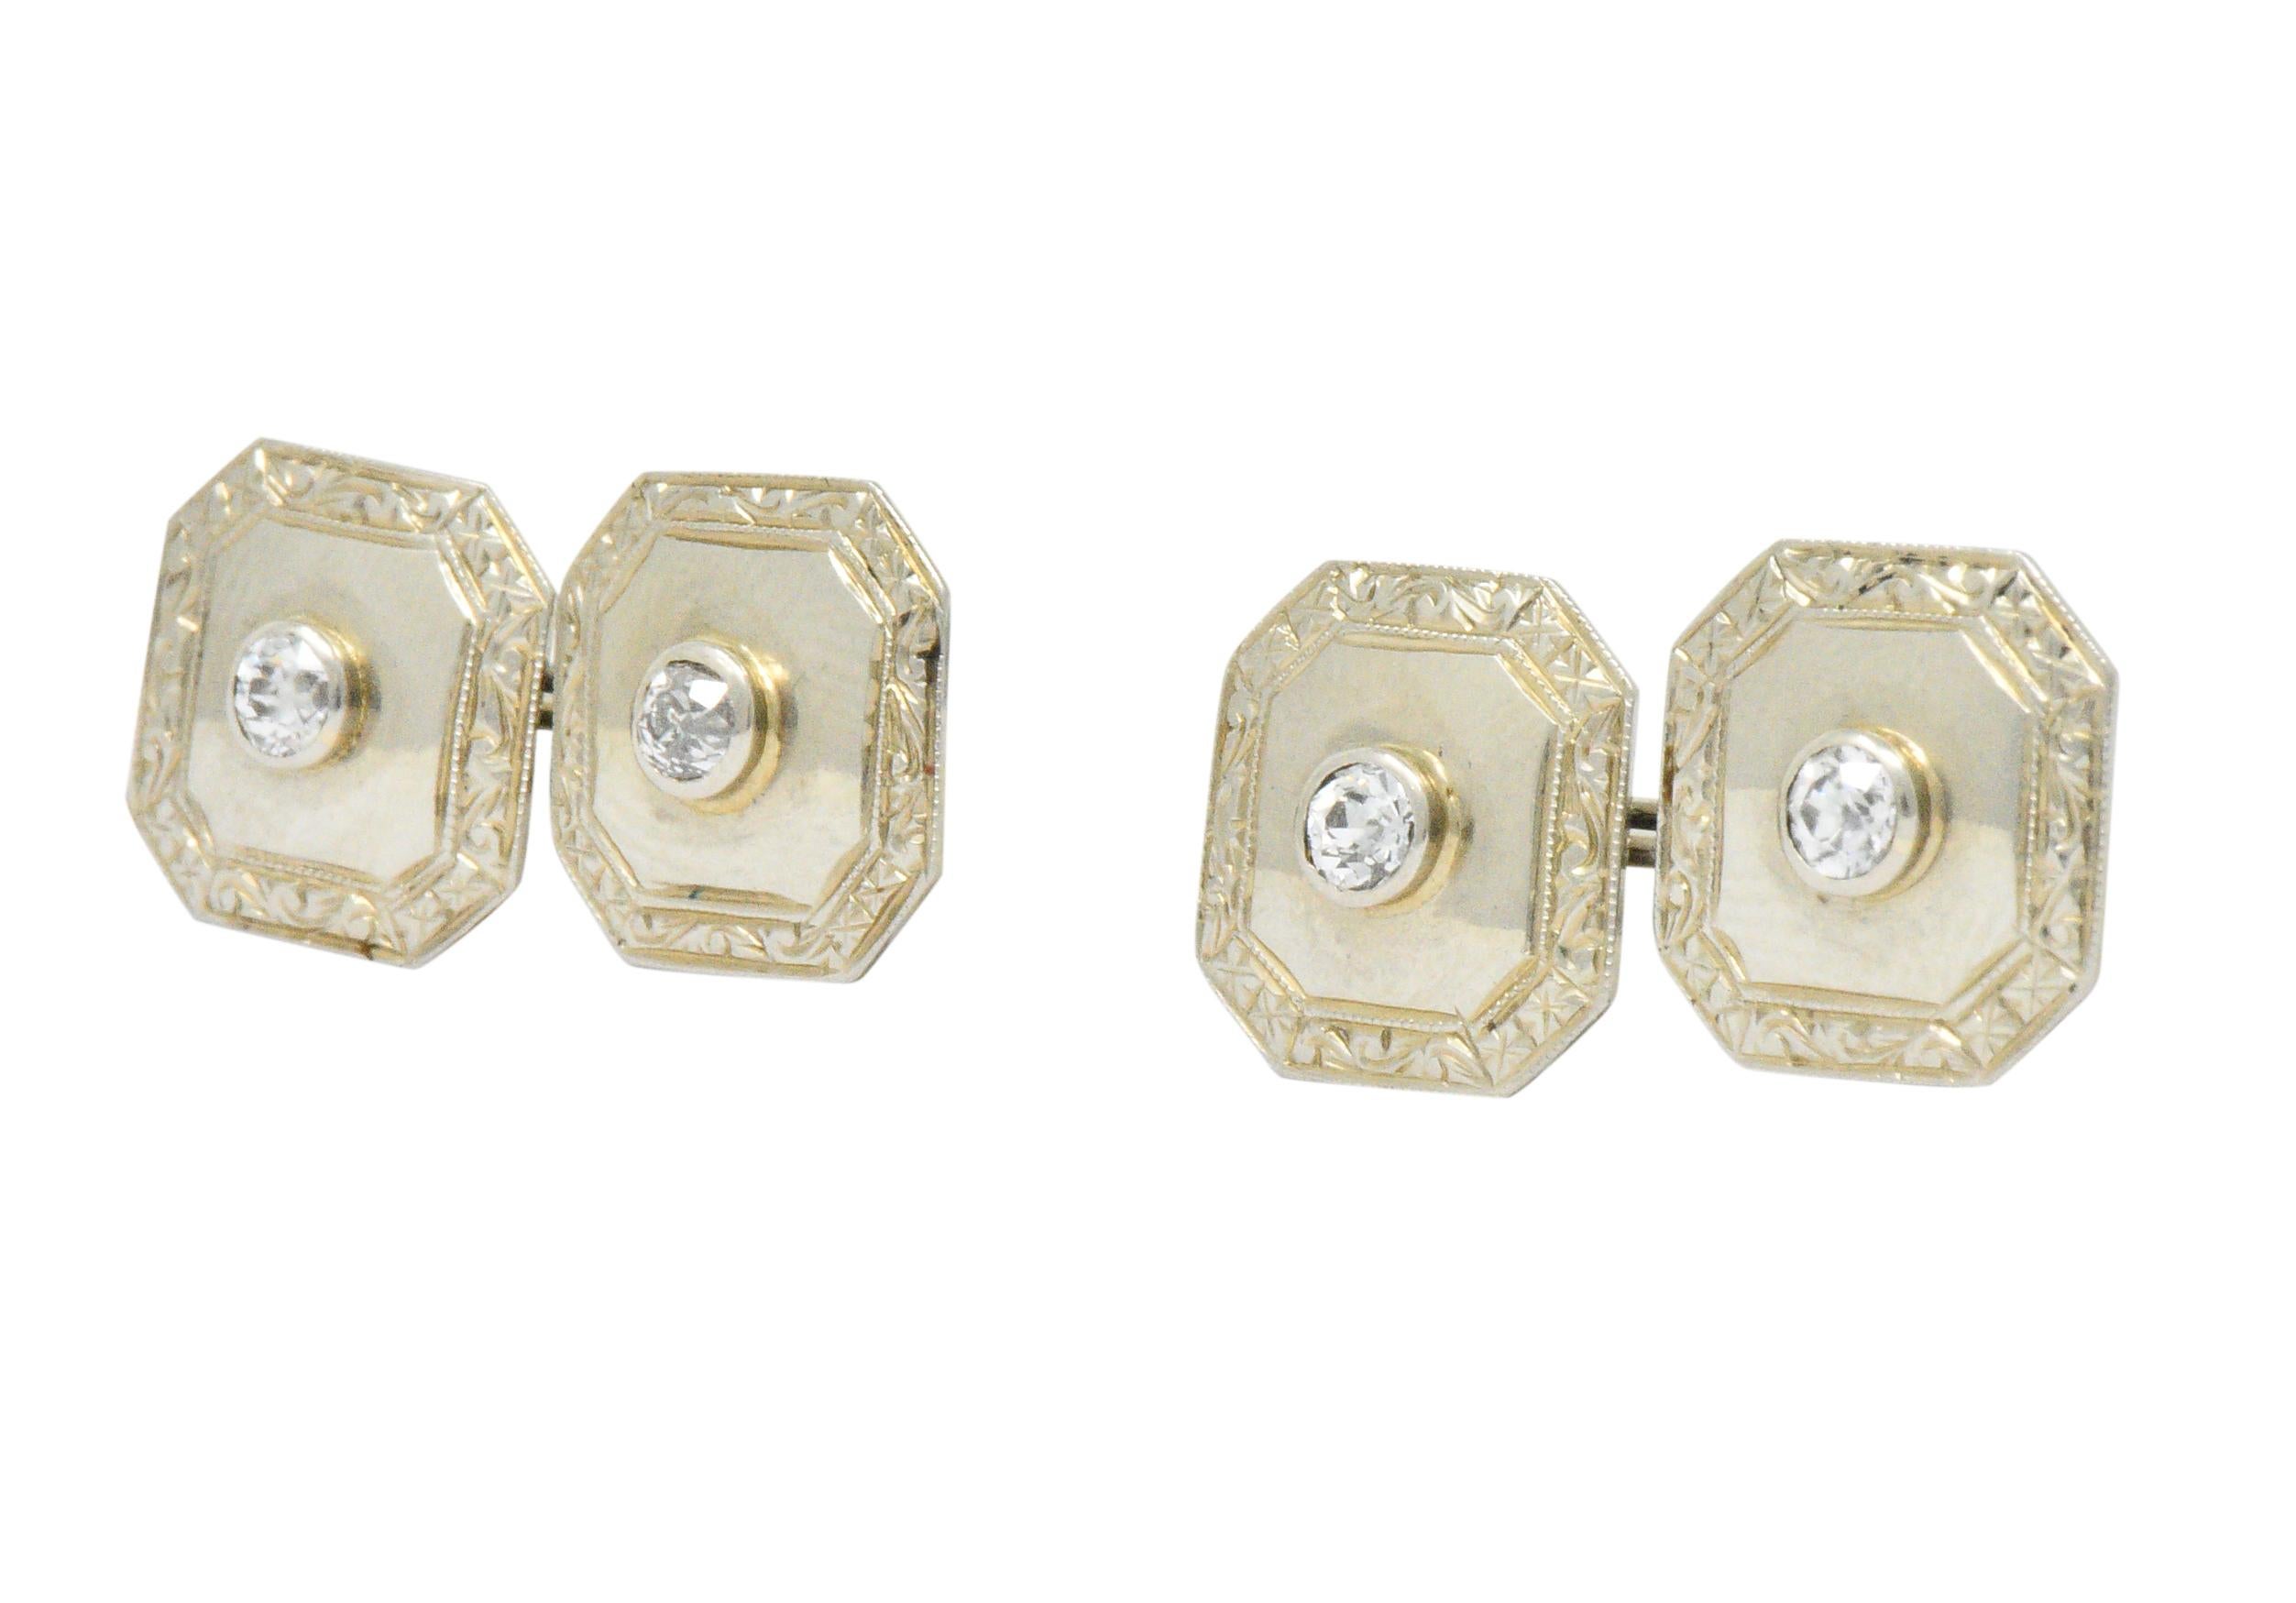 Each centering old European cut diamonds, four total weighing approximately 0.72 carat total, G/H color and VS2-SI2 clarity

Cut-corner square form with miligrain edge and scroll work border link style cufflinks

Tested as 18k gold

Measures: 1/2 x